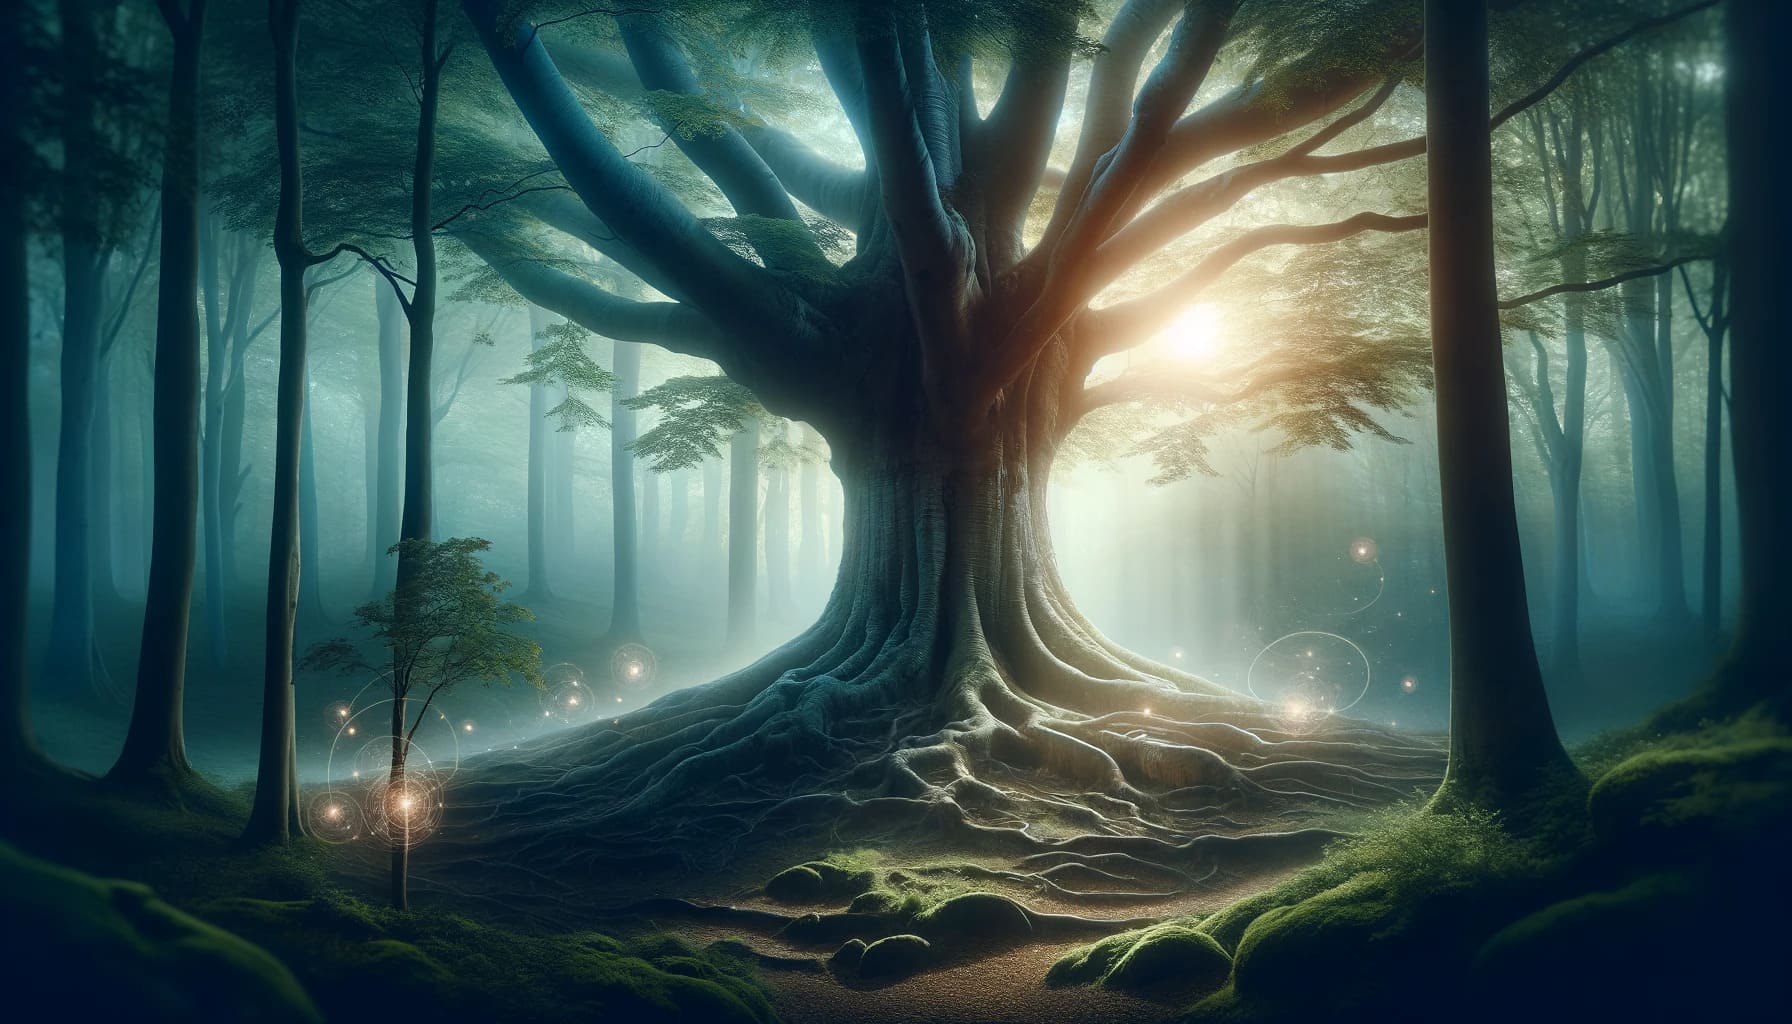 Spiritual meaning of a tree in a dream